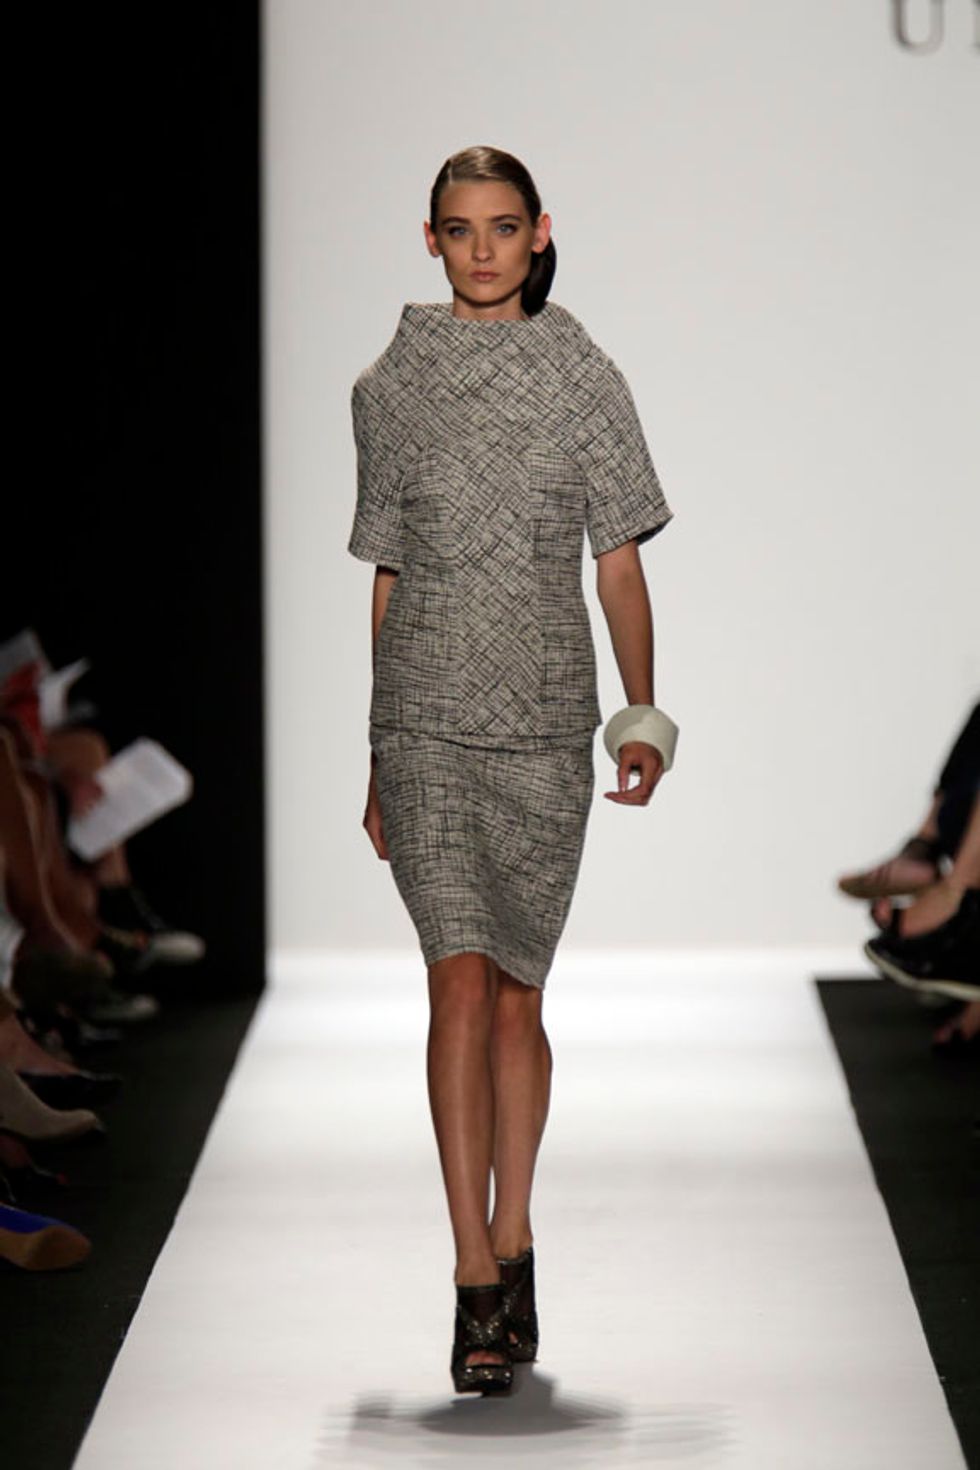 Academy of Art University Spring 2013 Collection Struts the Runway at NYFW